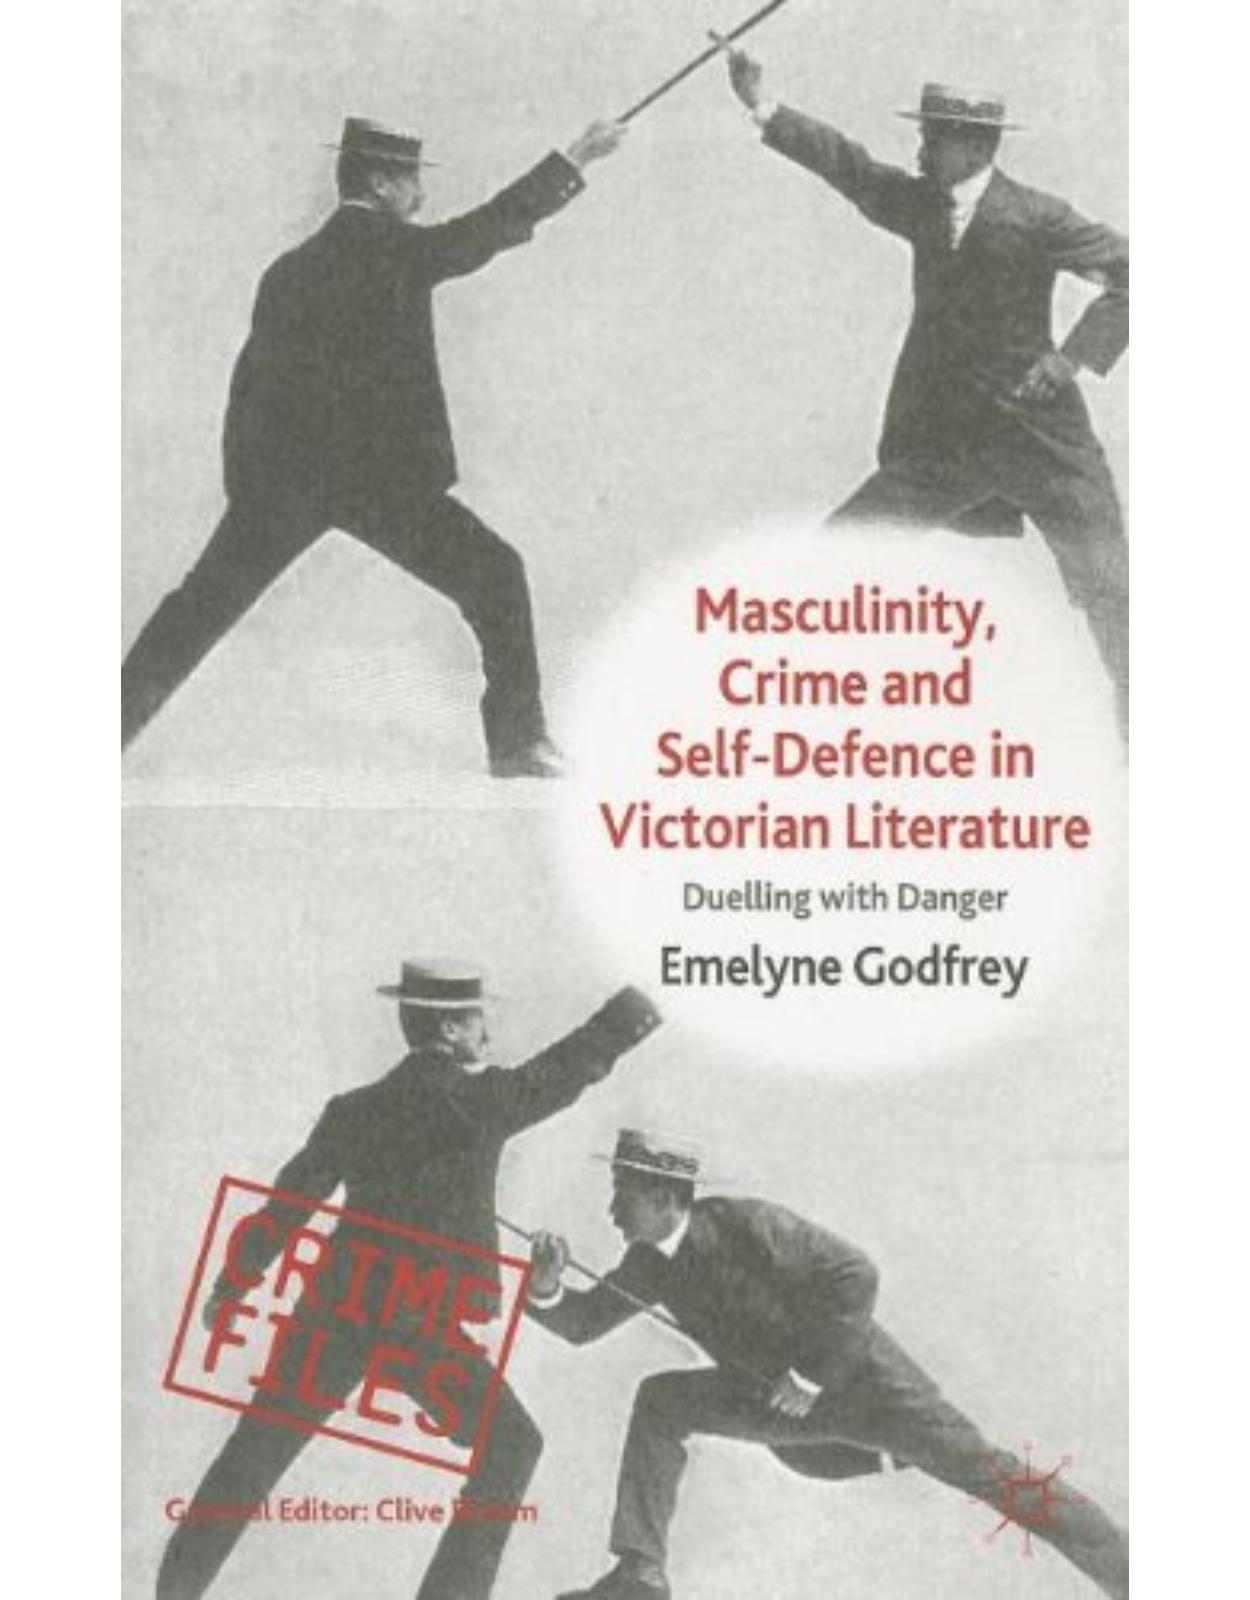 Masculinity, Crime and Self-Defence in Victorian Literature: Duelling with Danger (Crime Files)